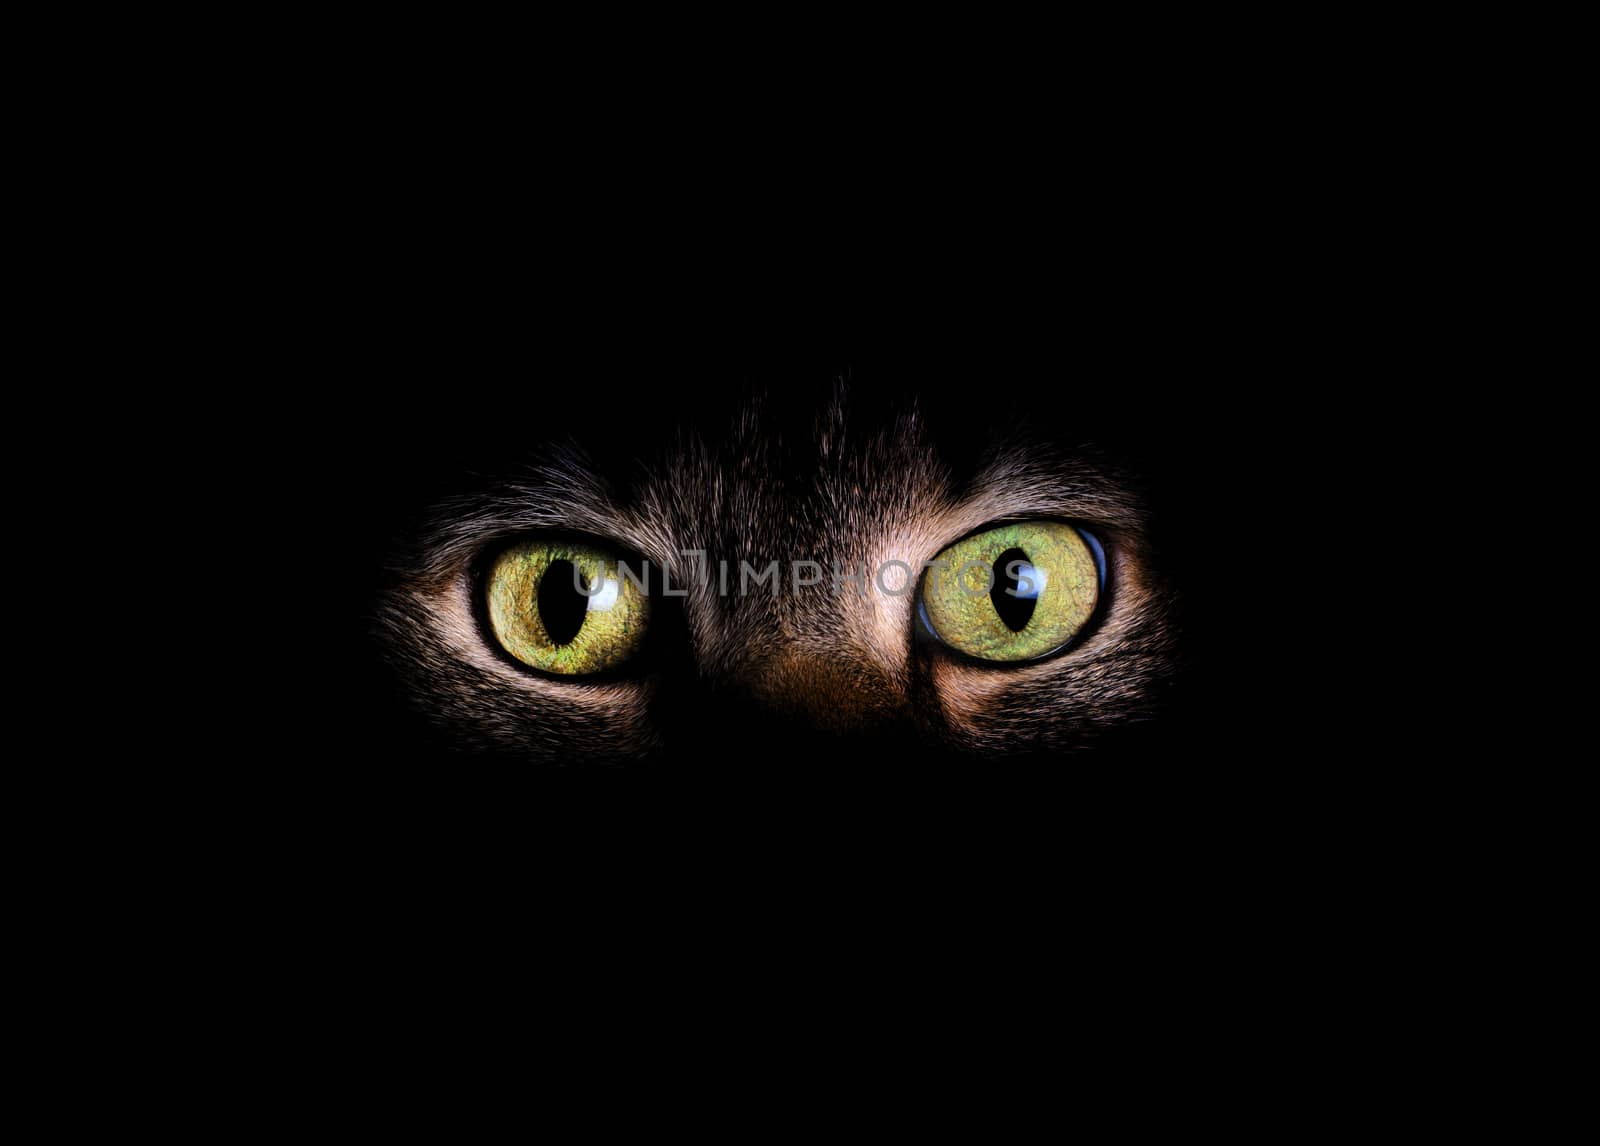 Animal eyes and face in dark background   by tab1962